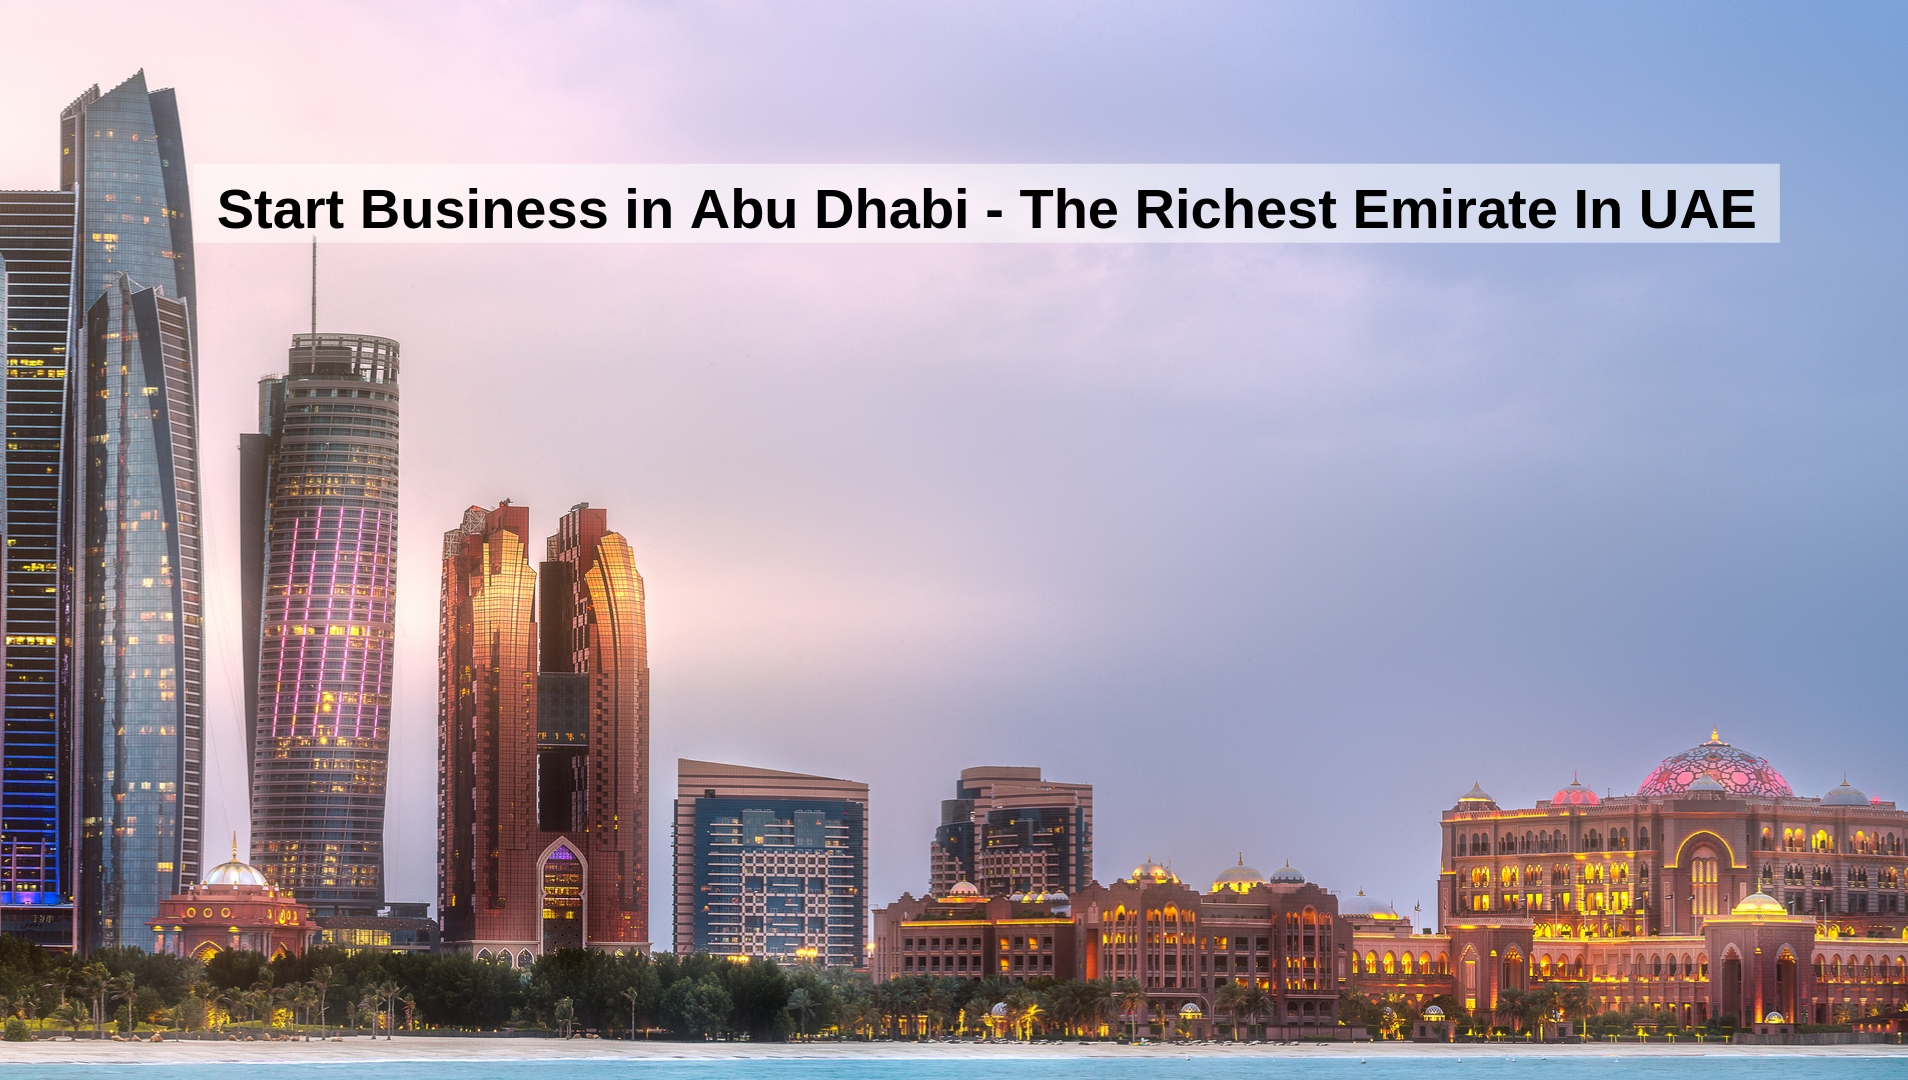 Can a foreigner start a business in Abu Dhabi?